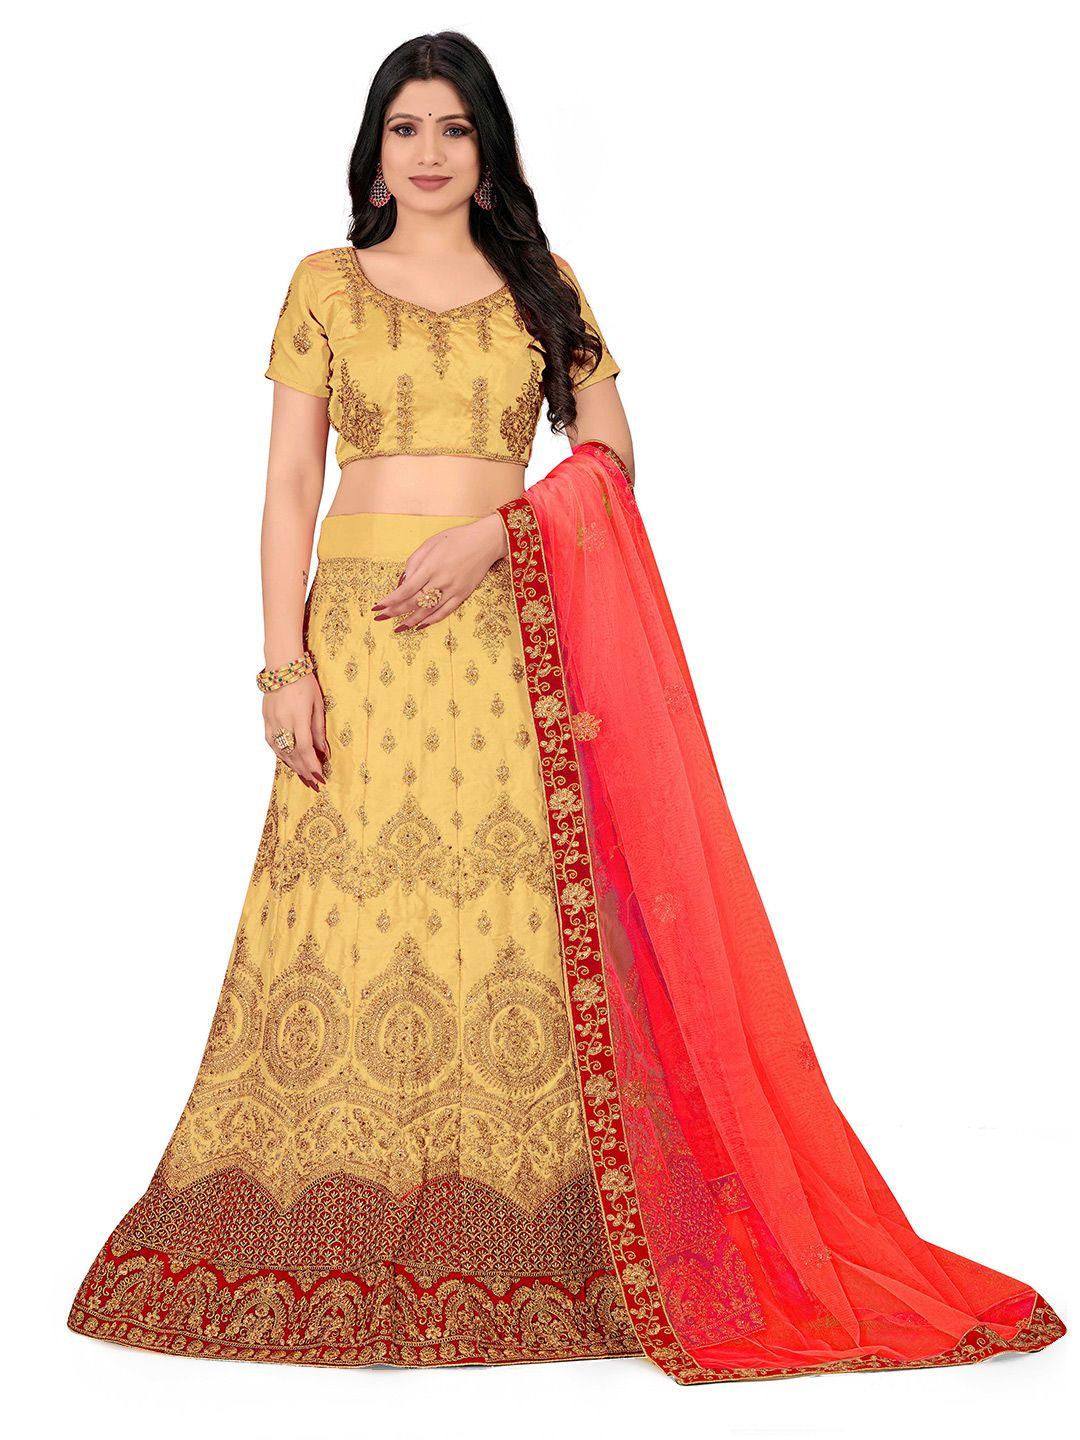 manvaa embroidered beads and stones semi-stitched lehenga & unstitched blouse with dupatta